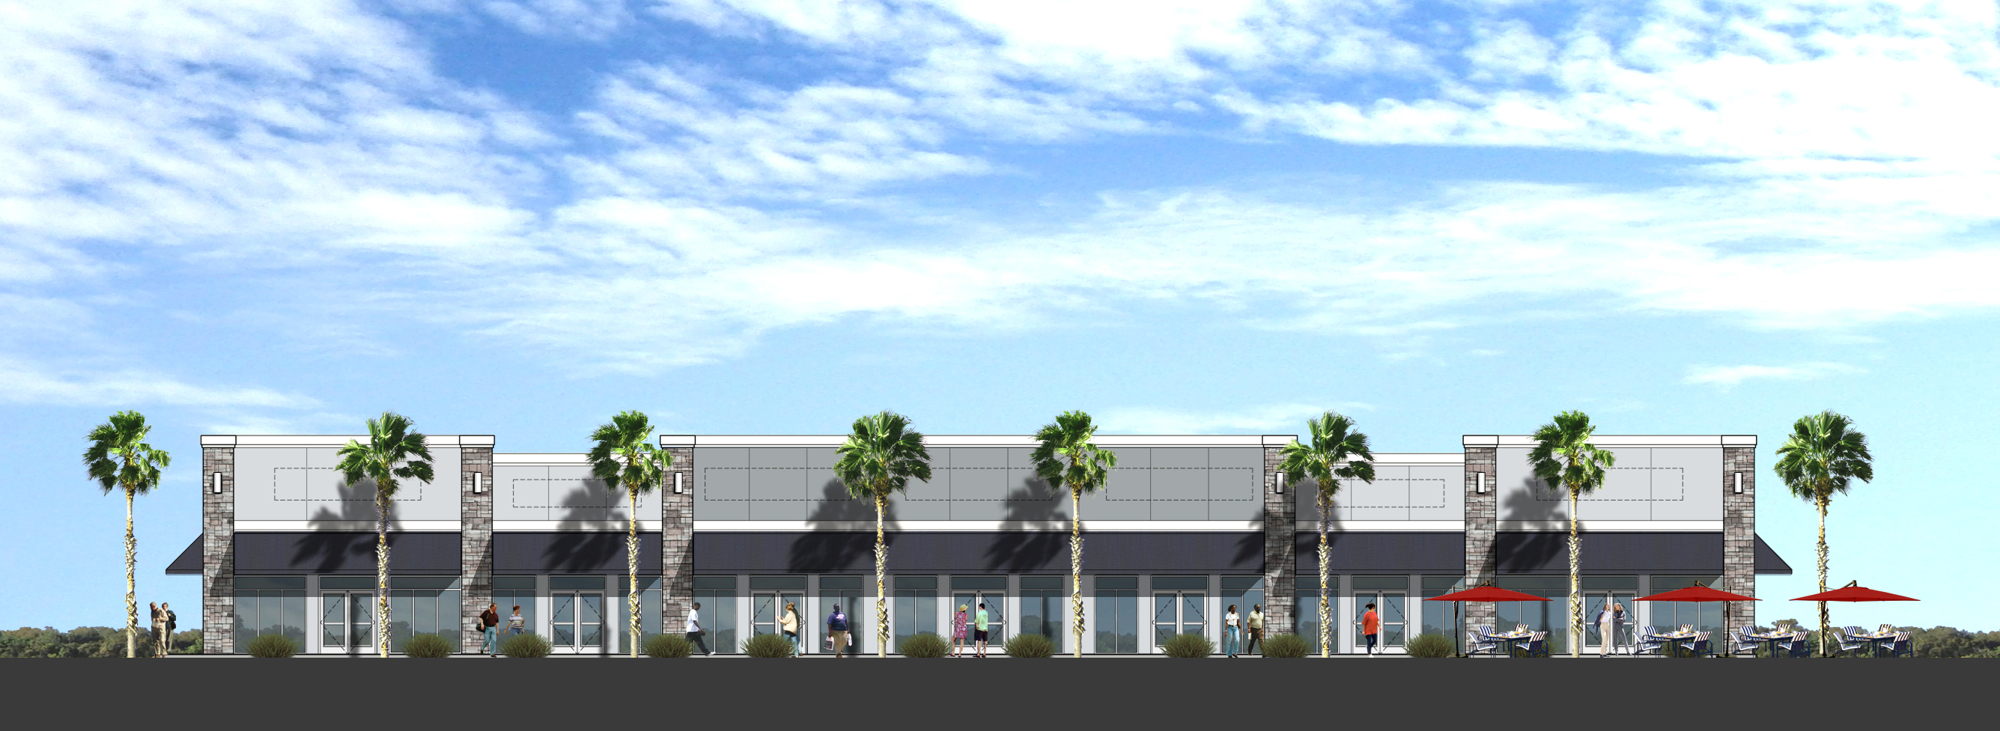 This rendering shows what a multi-tenant building on property may look like.